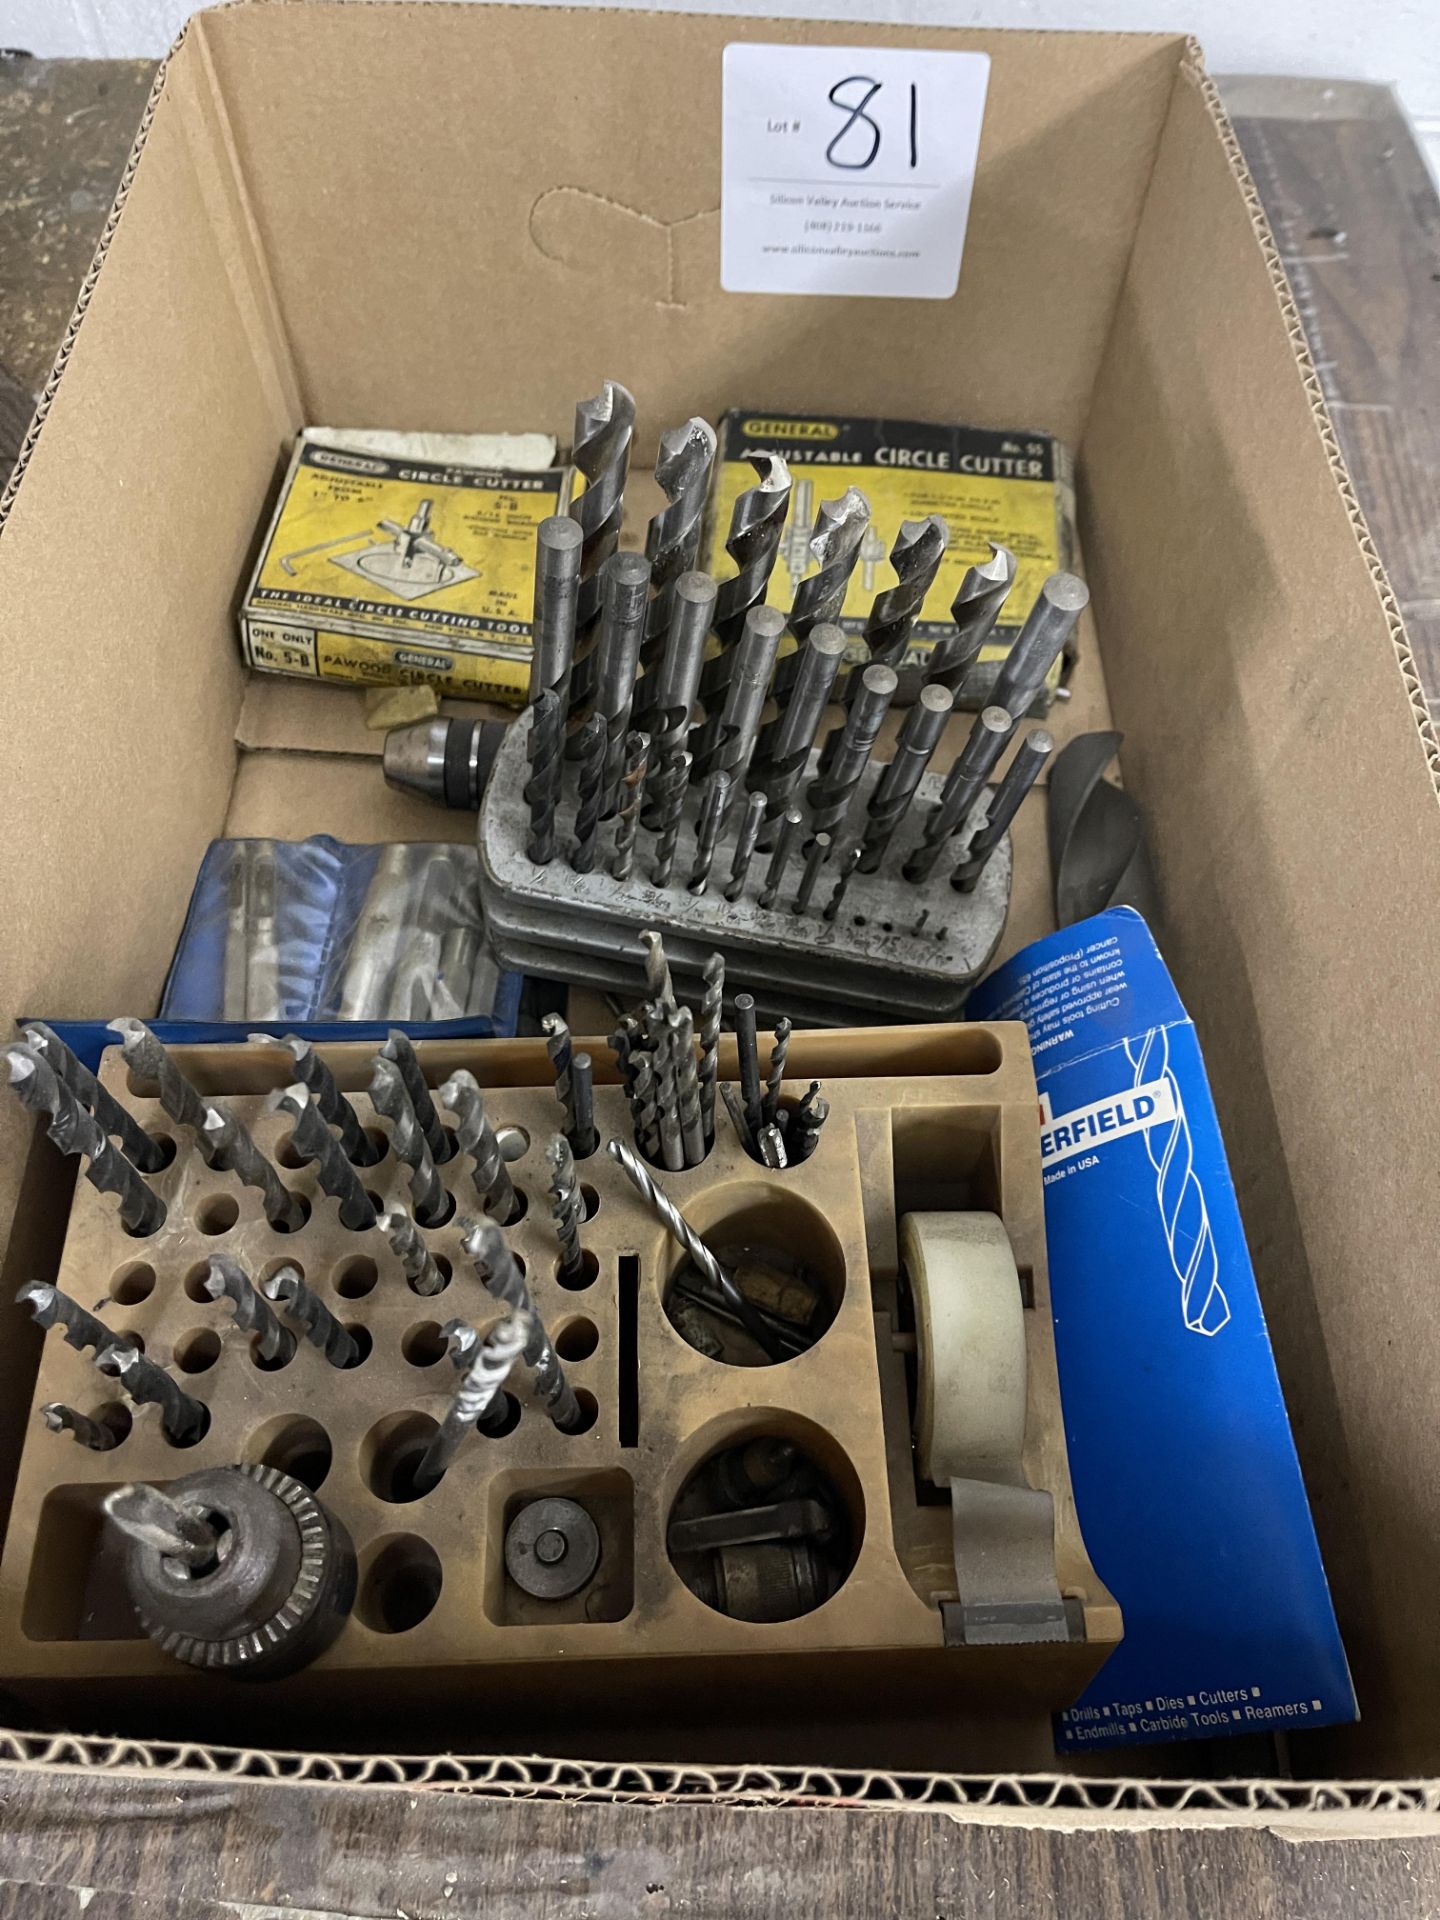 Miscellaneous drill bits, chuck key, and circle cutters